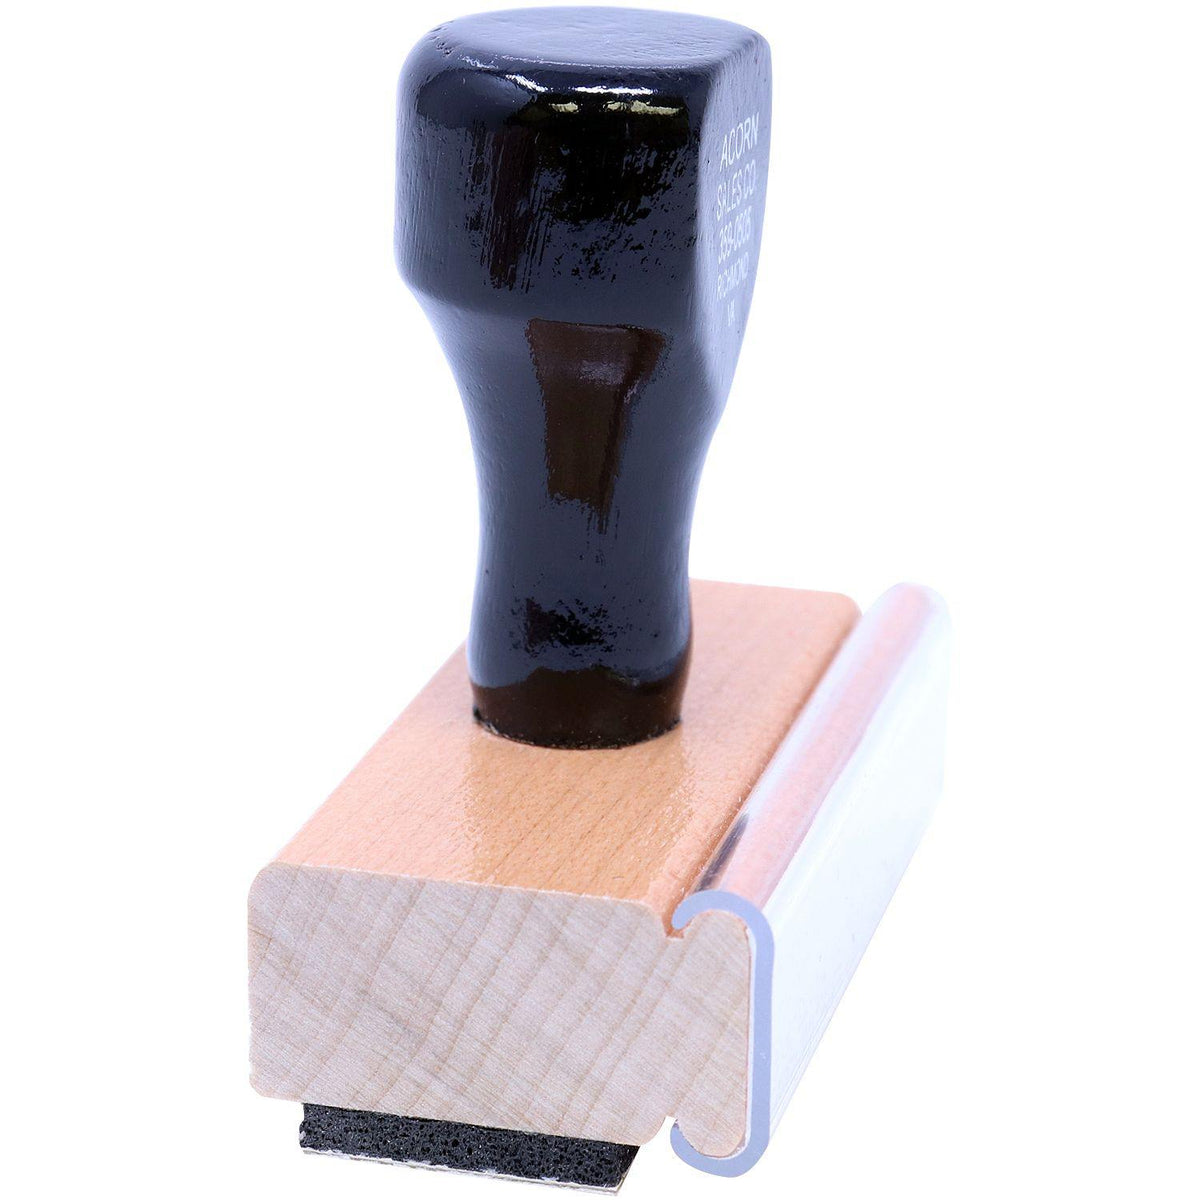 Side View of Joint Exhibit Rubber Stamp at an Angle